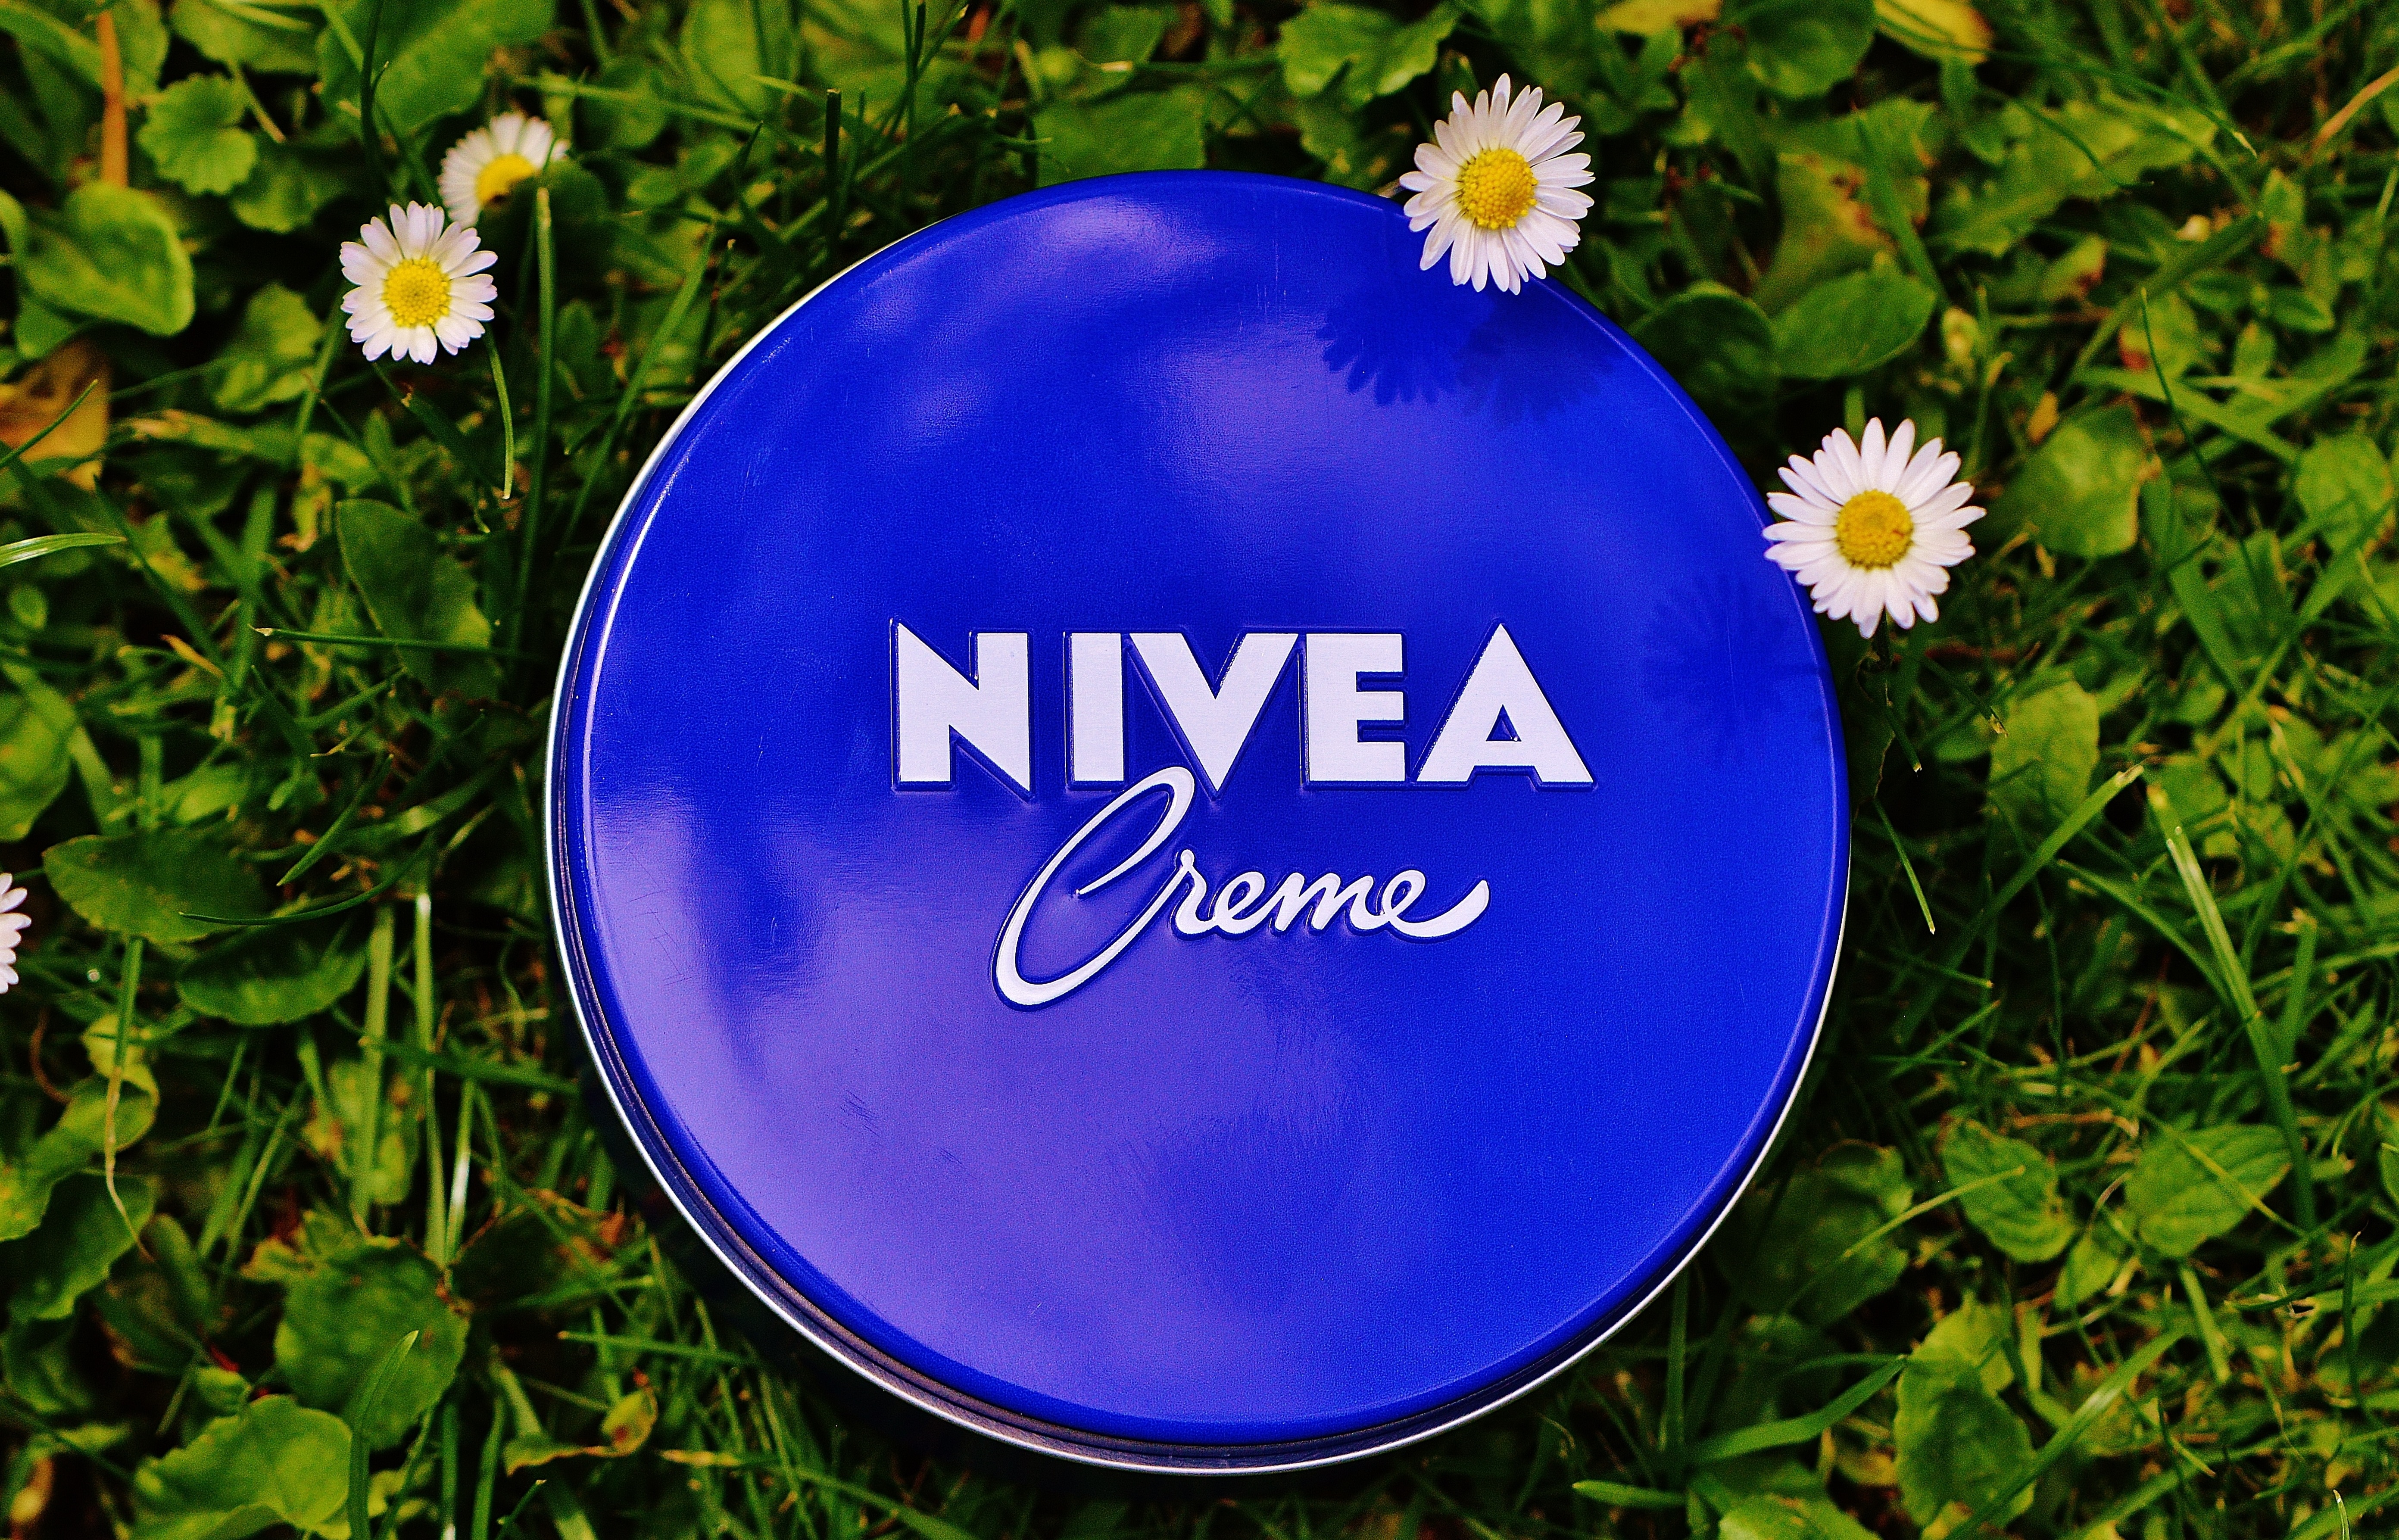 blue nvea creme metal container on green leaf with four white daisy flowers